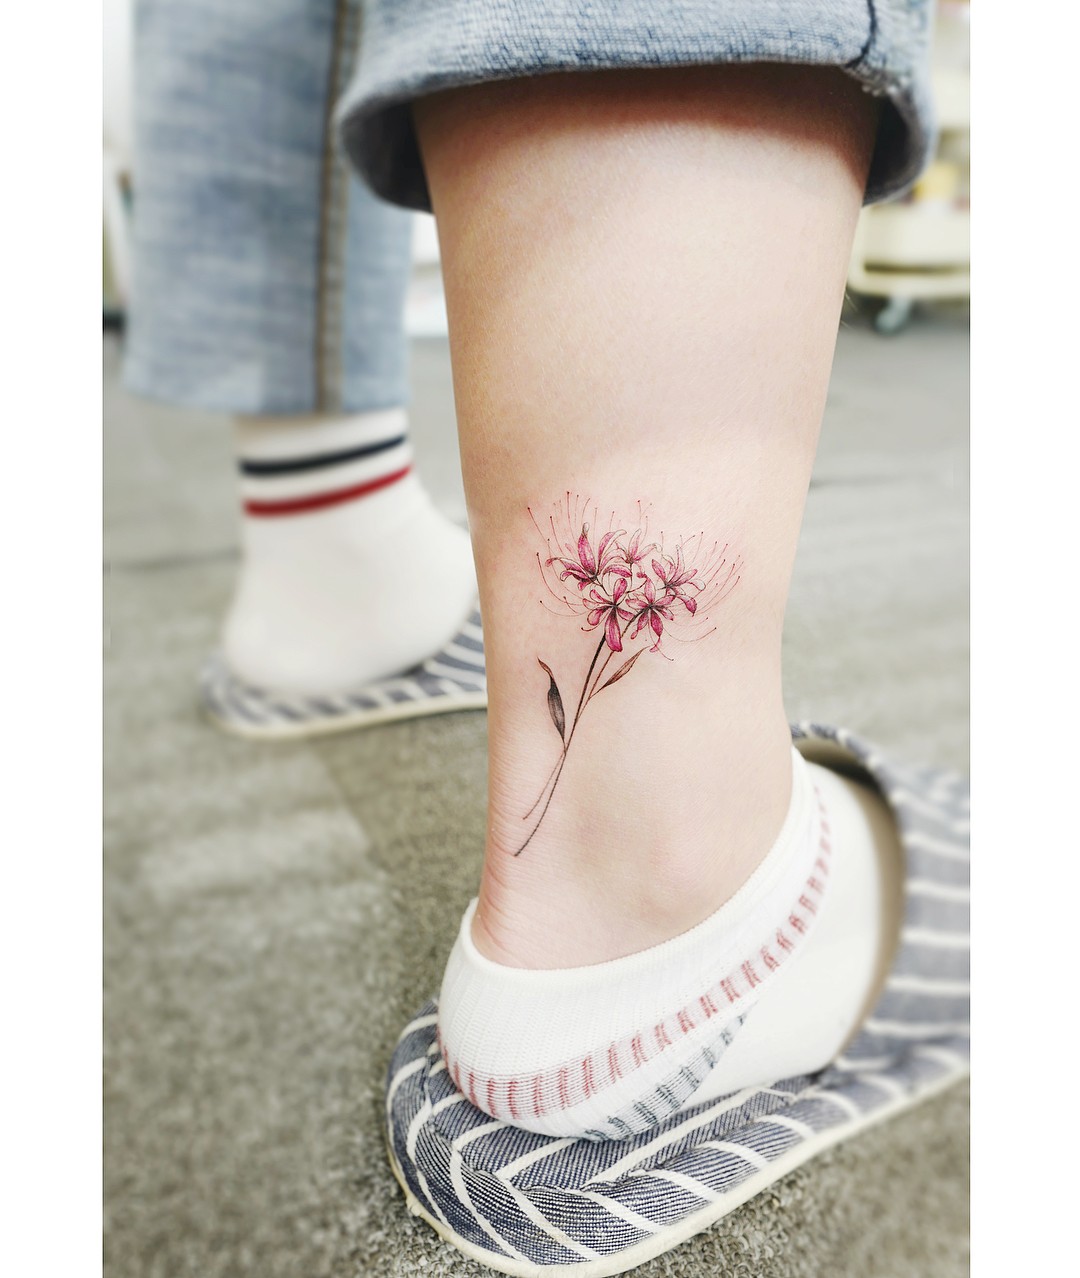 : Red spider lily 🌺 . . #Tattooistbanul #타투이스트바늘